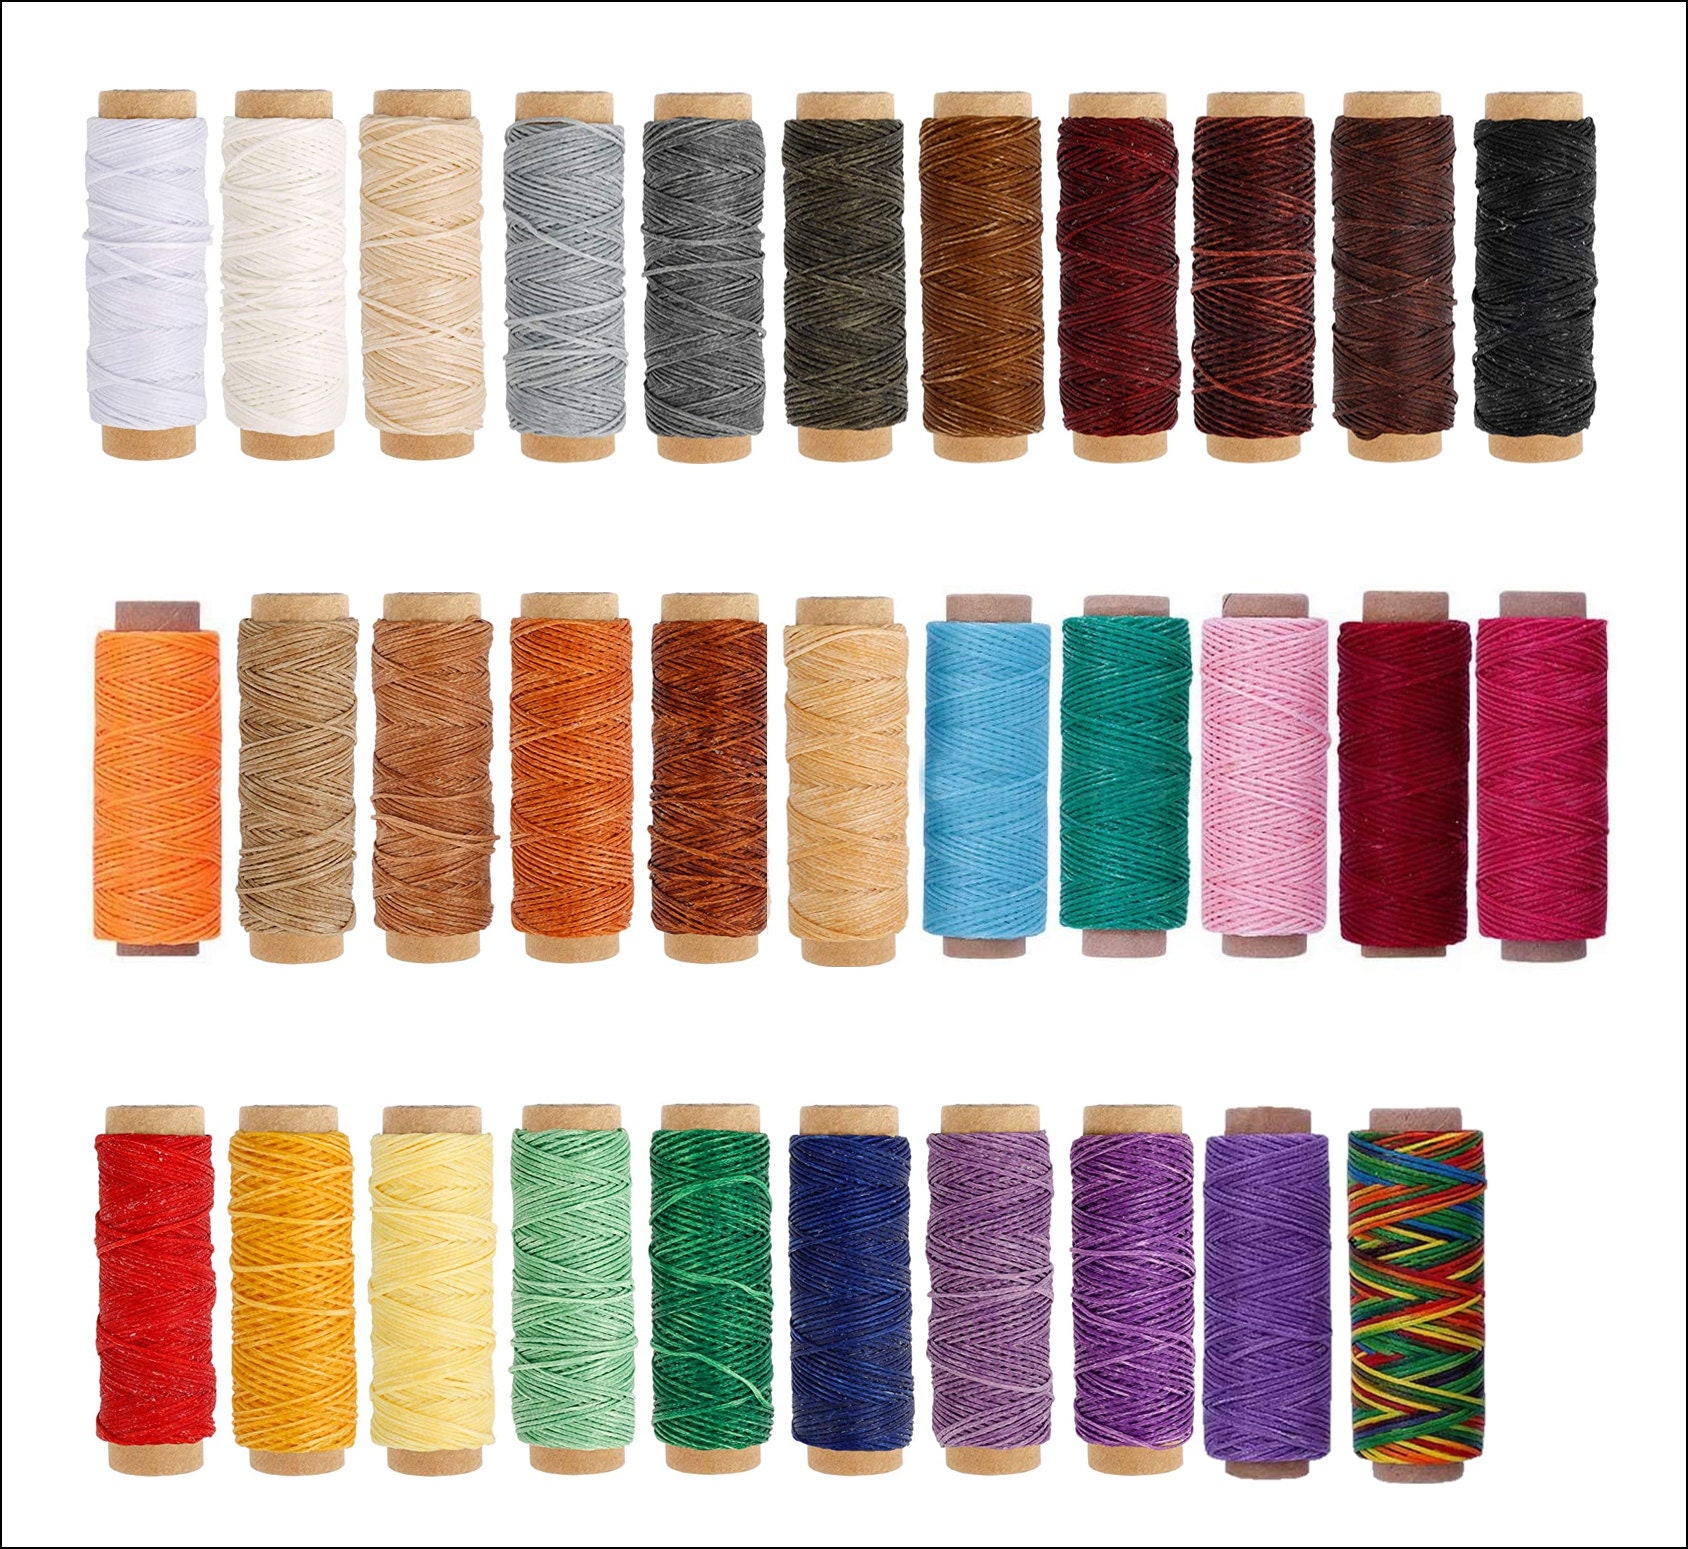 Thread for Leather Craft RITZA 25 1.2mm in 20 Colours/waxed Tiger Thread/ ritza 25 Thread/waxed Polyester/saddlers Thread 